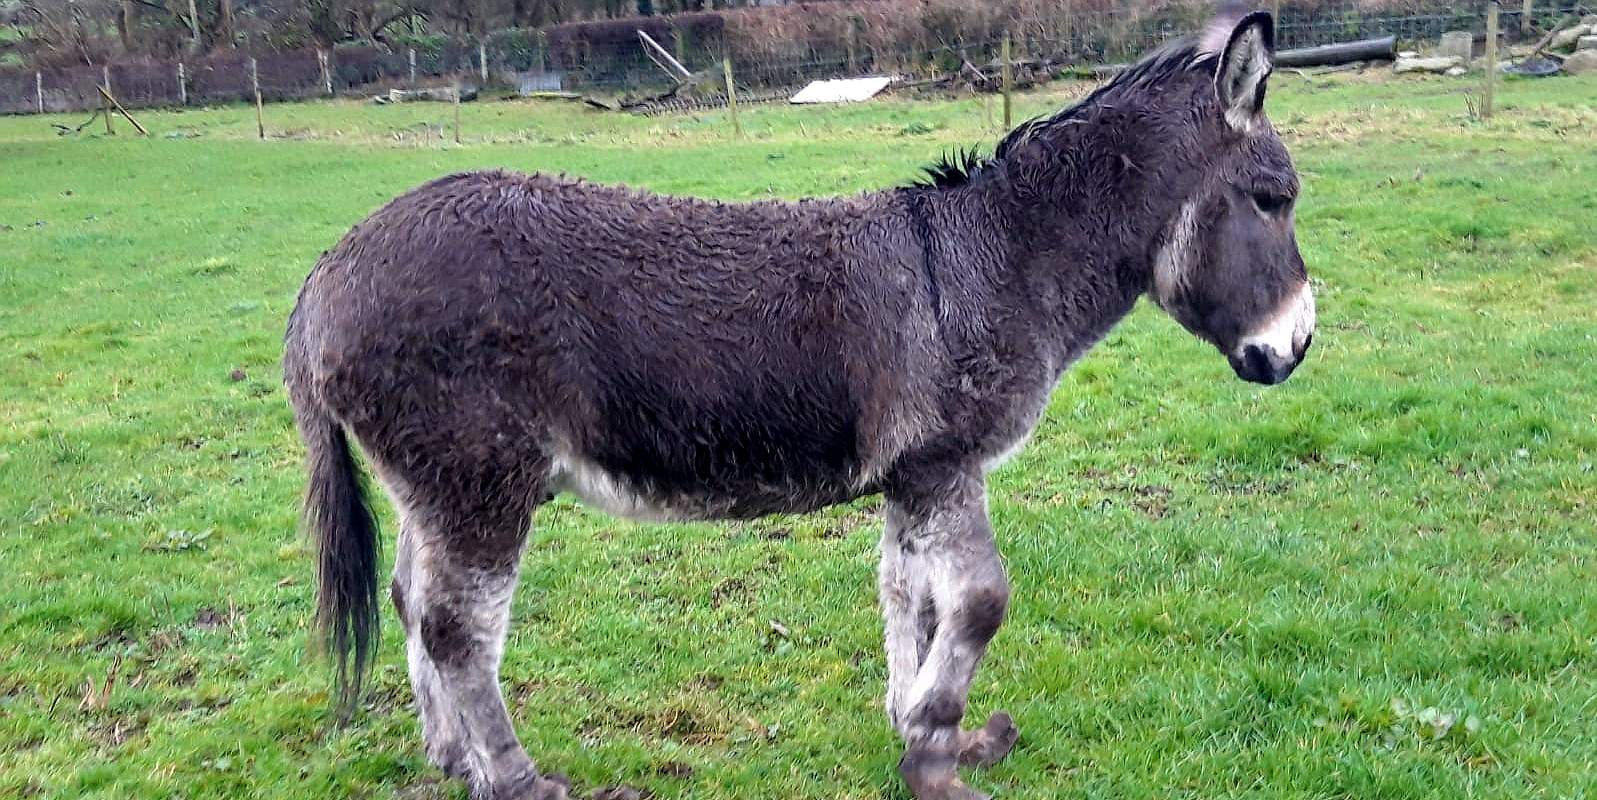 Donkey with long hooves